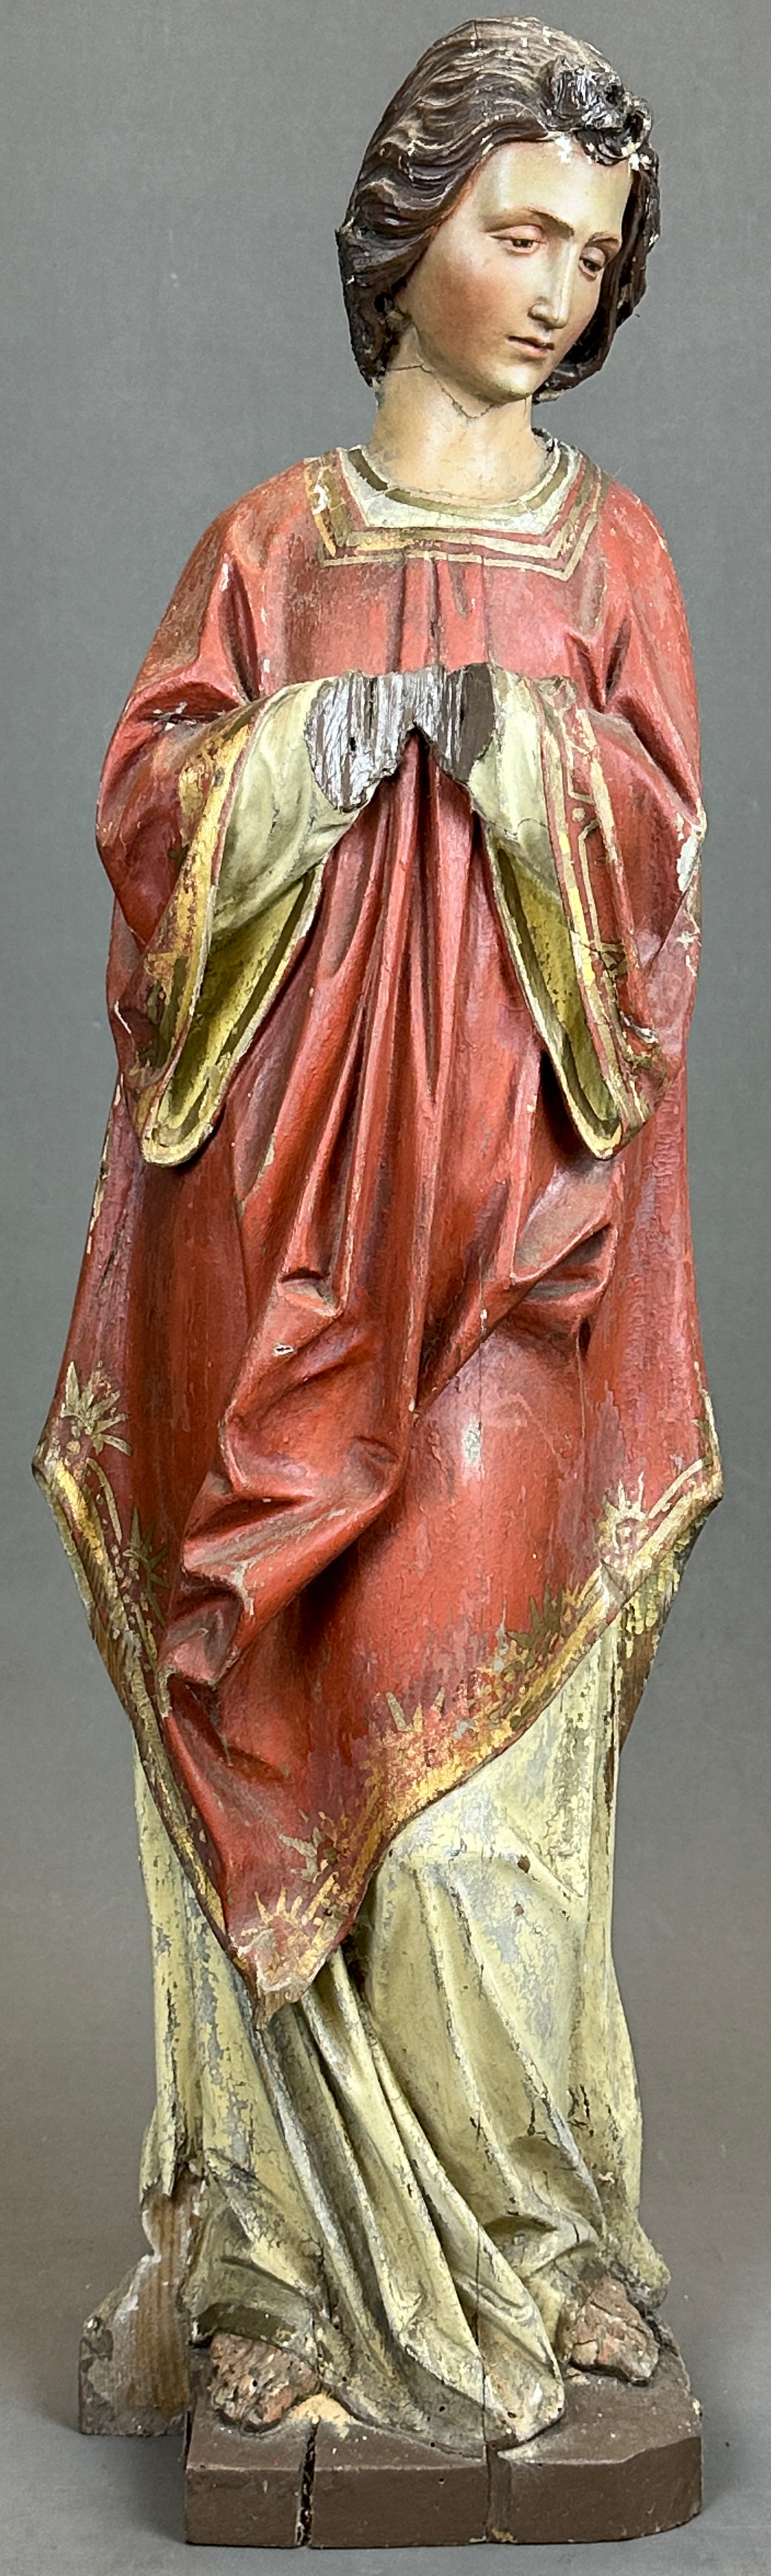 Wooden figure. St Nepomuk. 1st half of the 19th century. Germany.